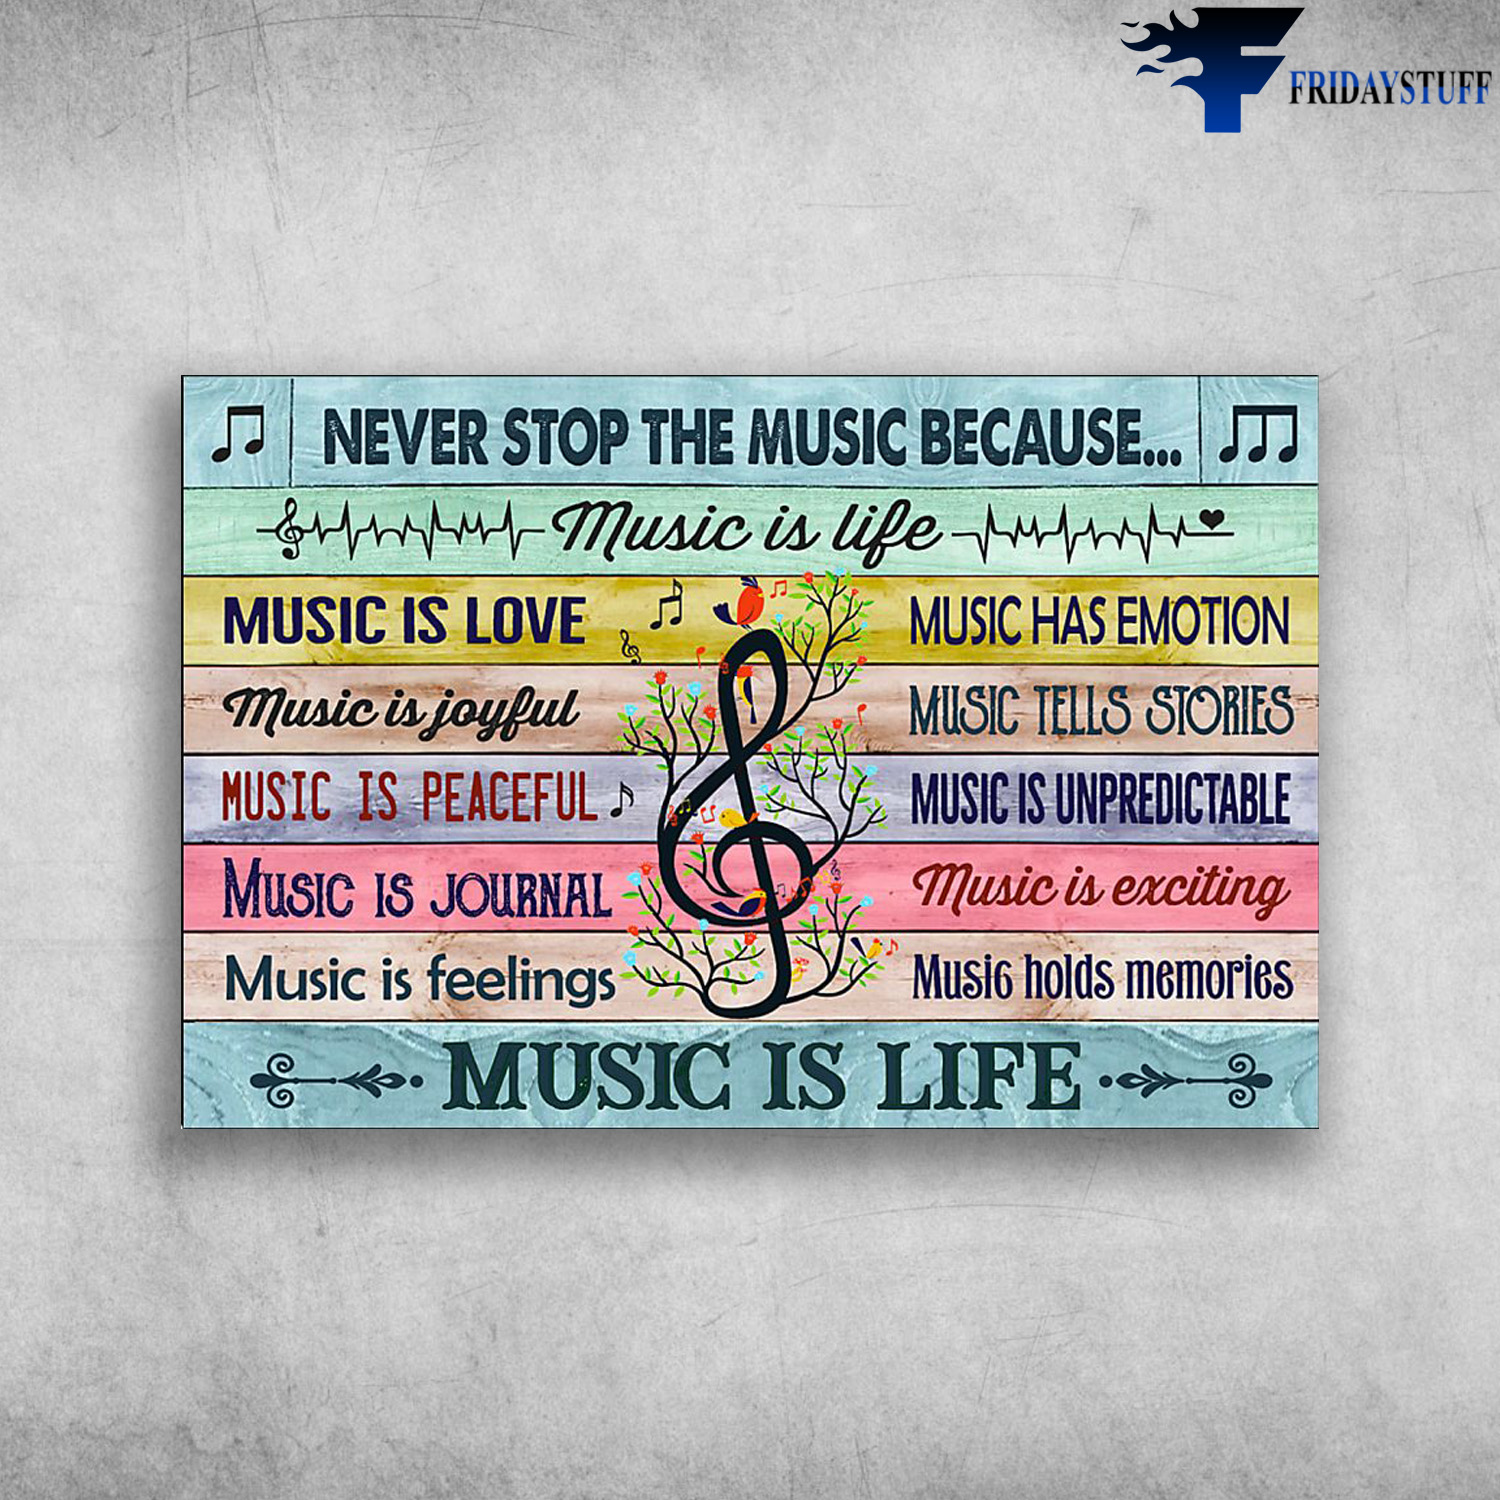 Music Poster - Never Stop The Music Because Music Is Life, Music Is Love, Music Is Joyful, Music Is Peaceful, Music Is Journal, Music Is Feelings, Music Has Emotion, Music Tells Stories, Music Is Unpredictable, Music Is Exciting, Music Holds Memories